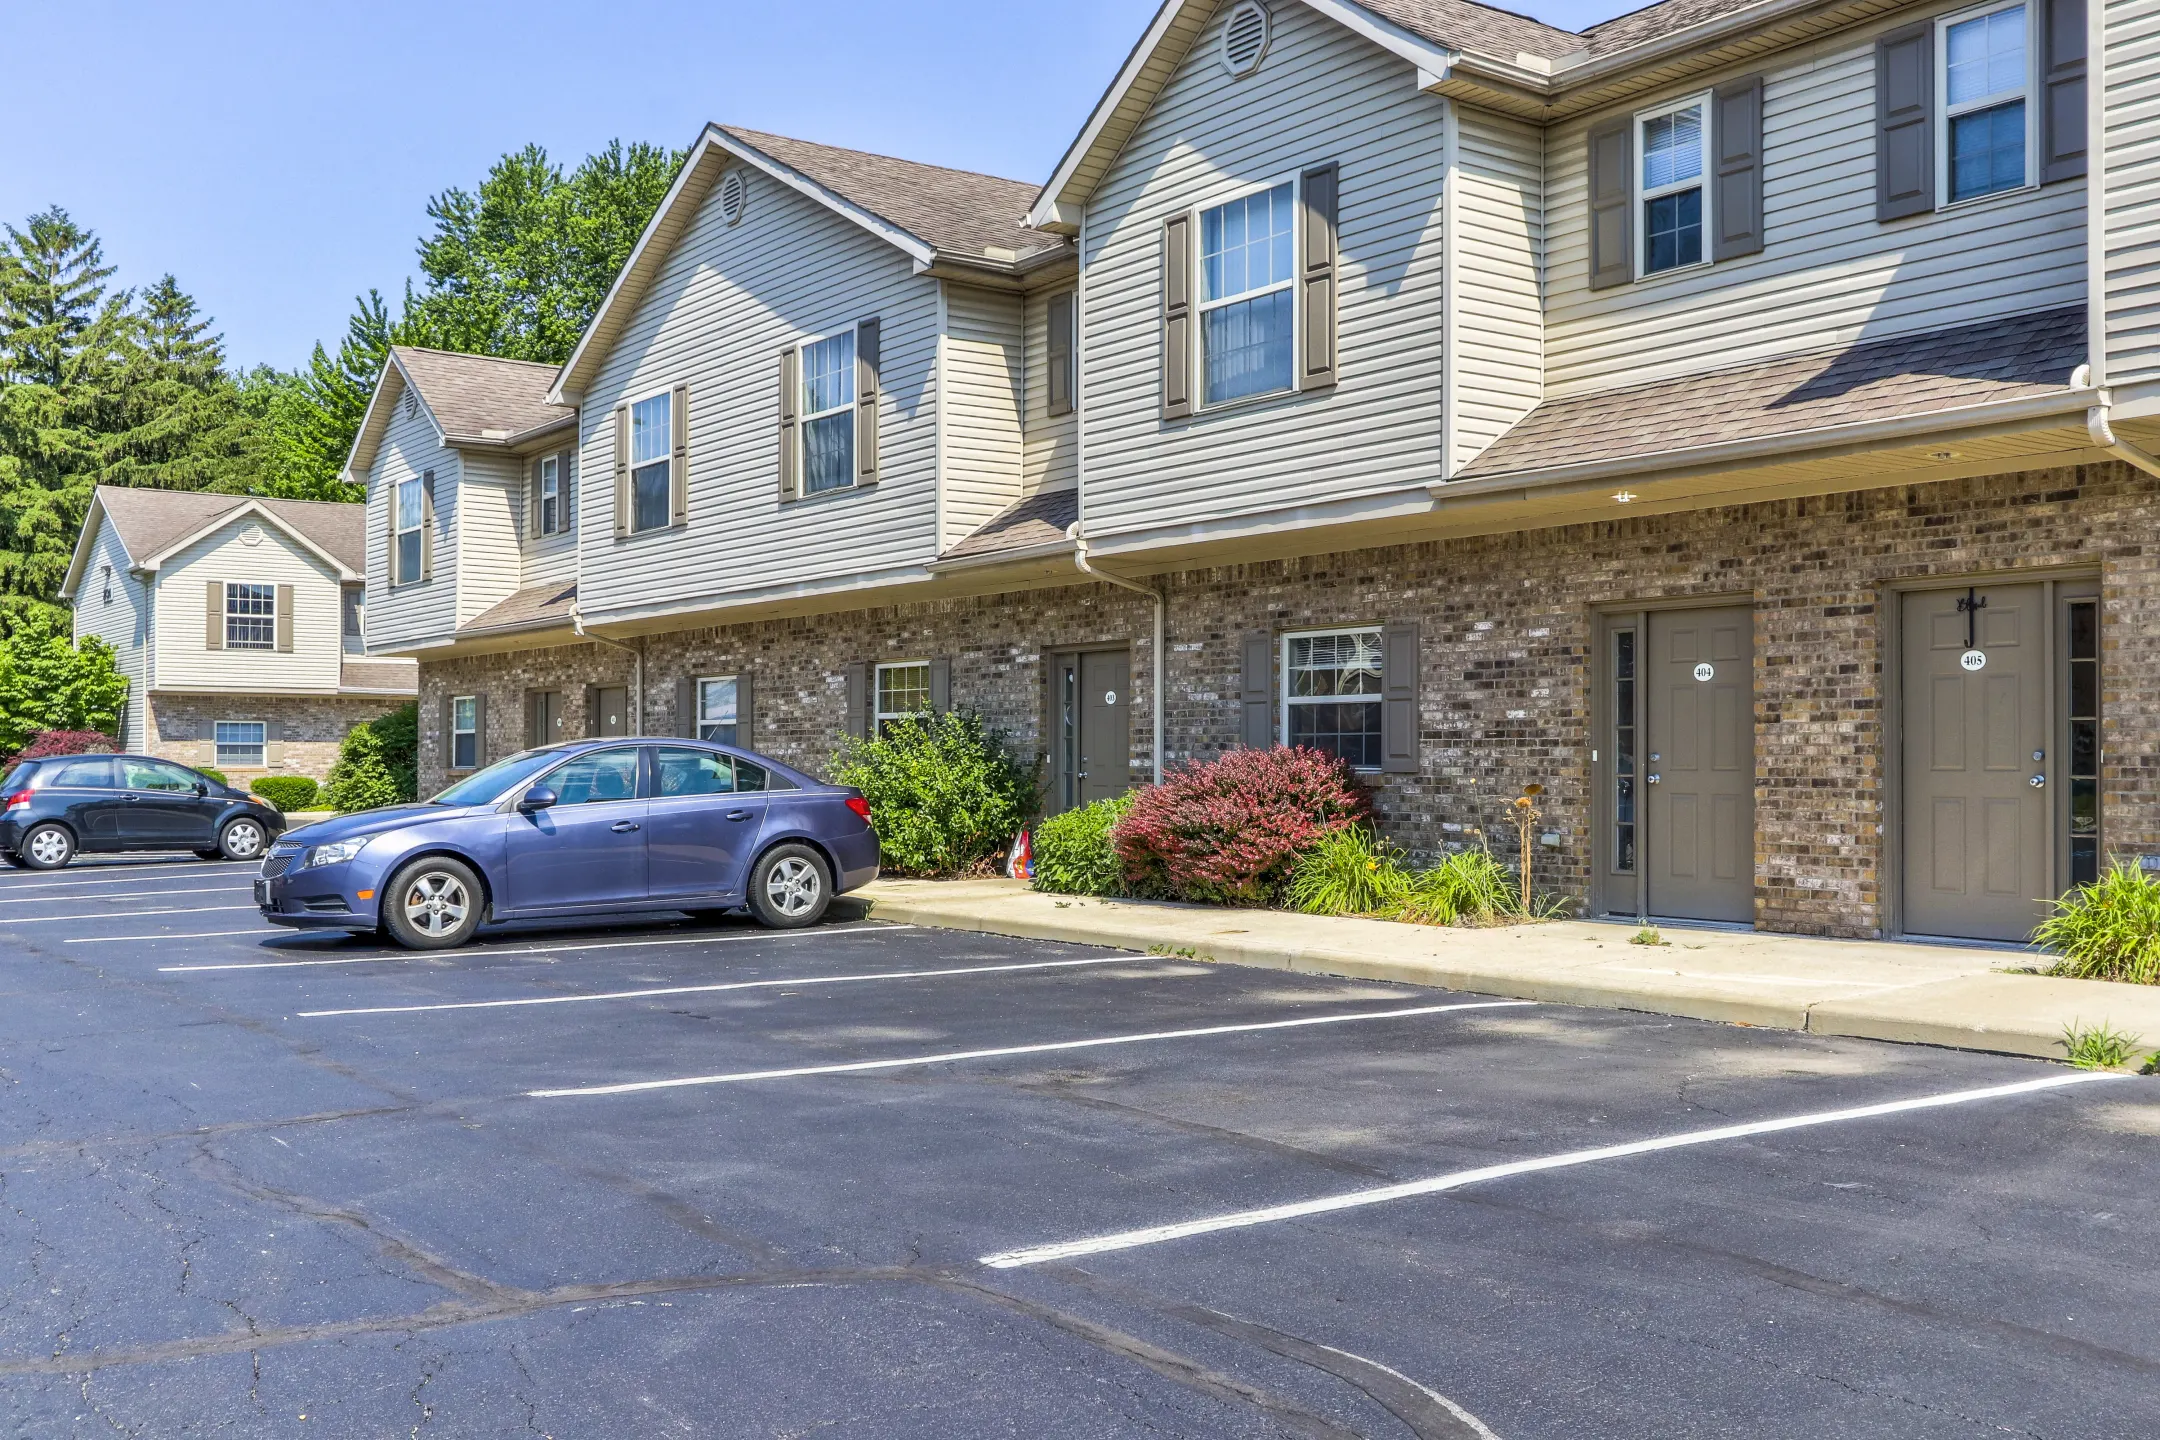 Building - Westridge Apartments And Townhomes - Toledo, OH